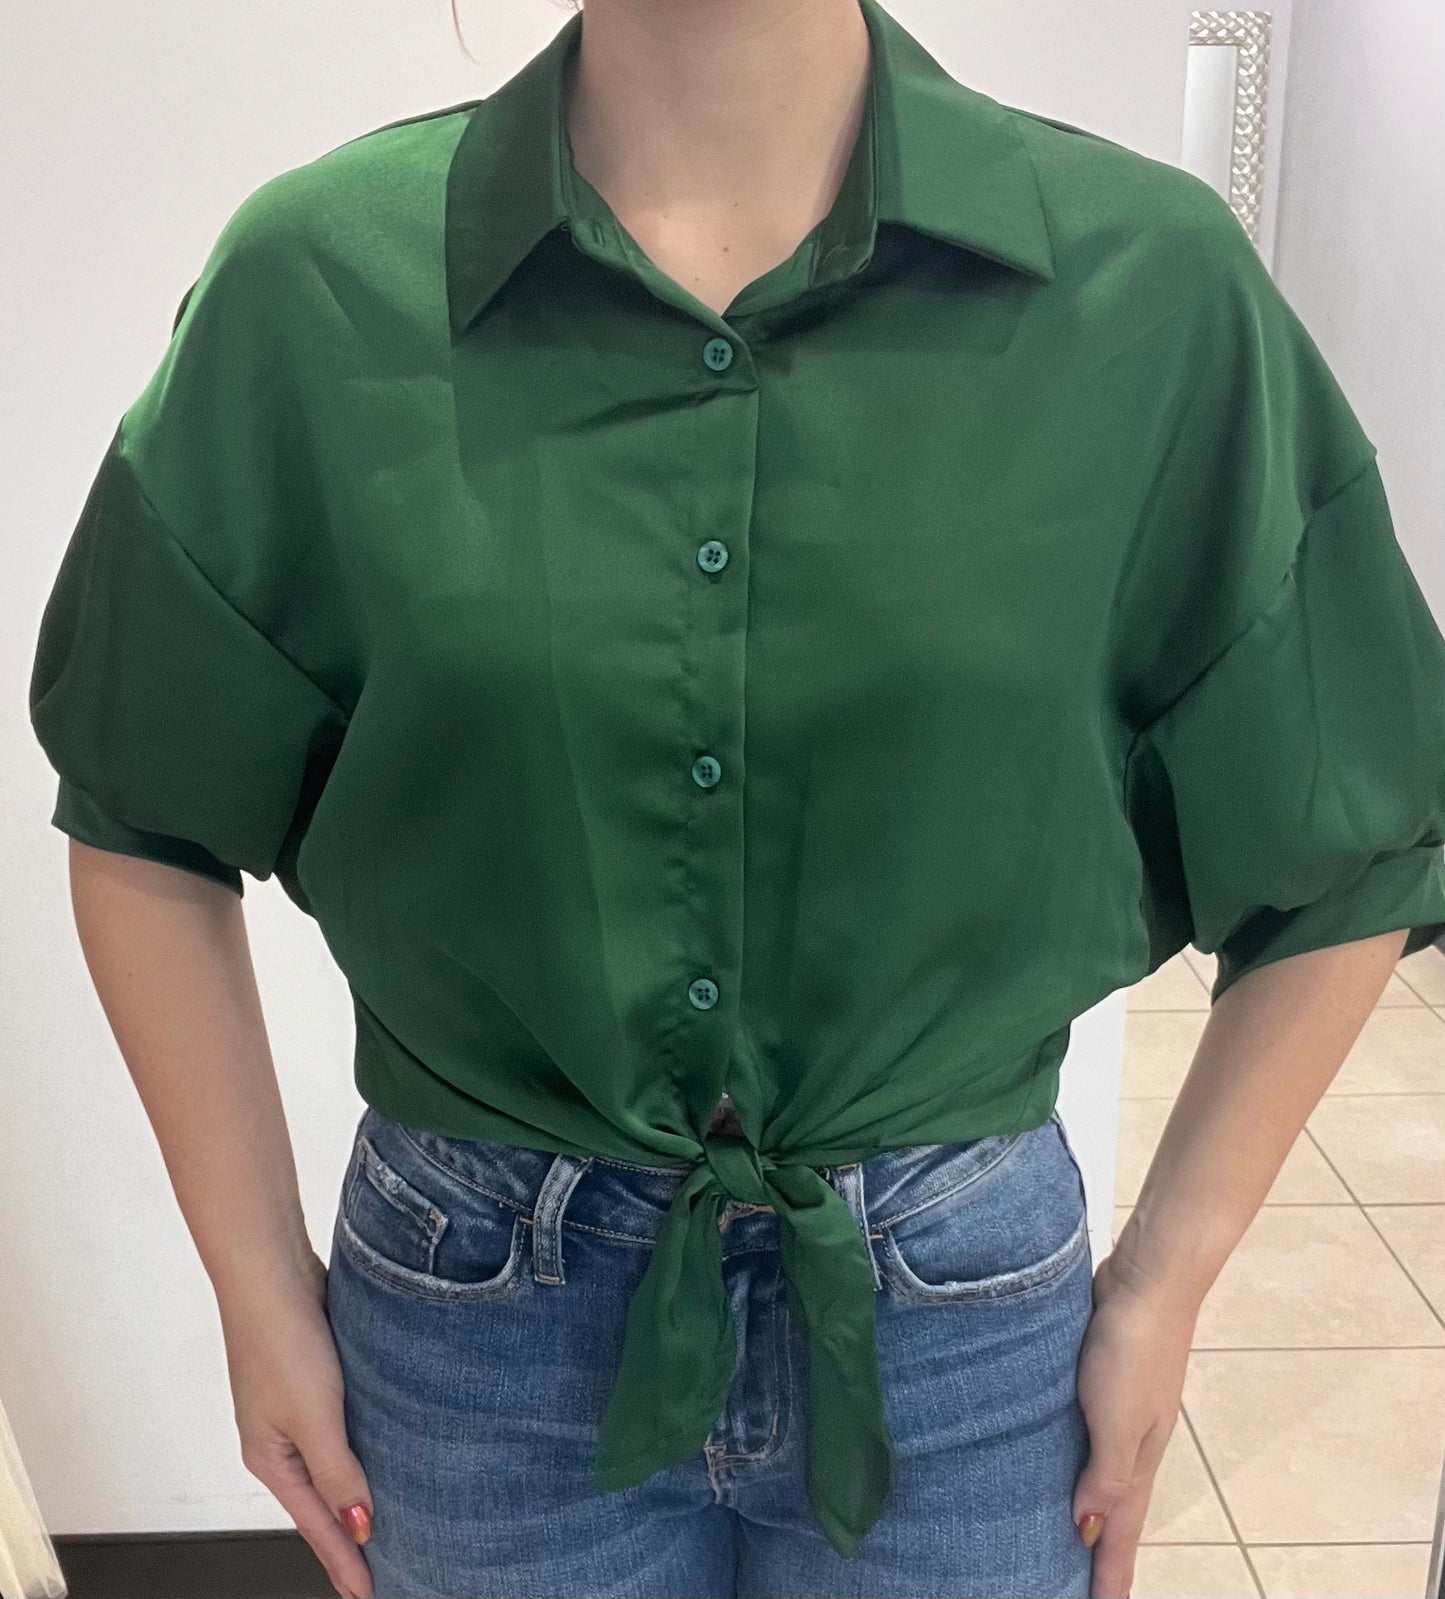 Silk One/Size Blouse